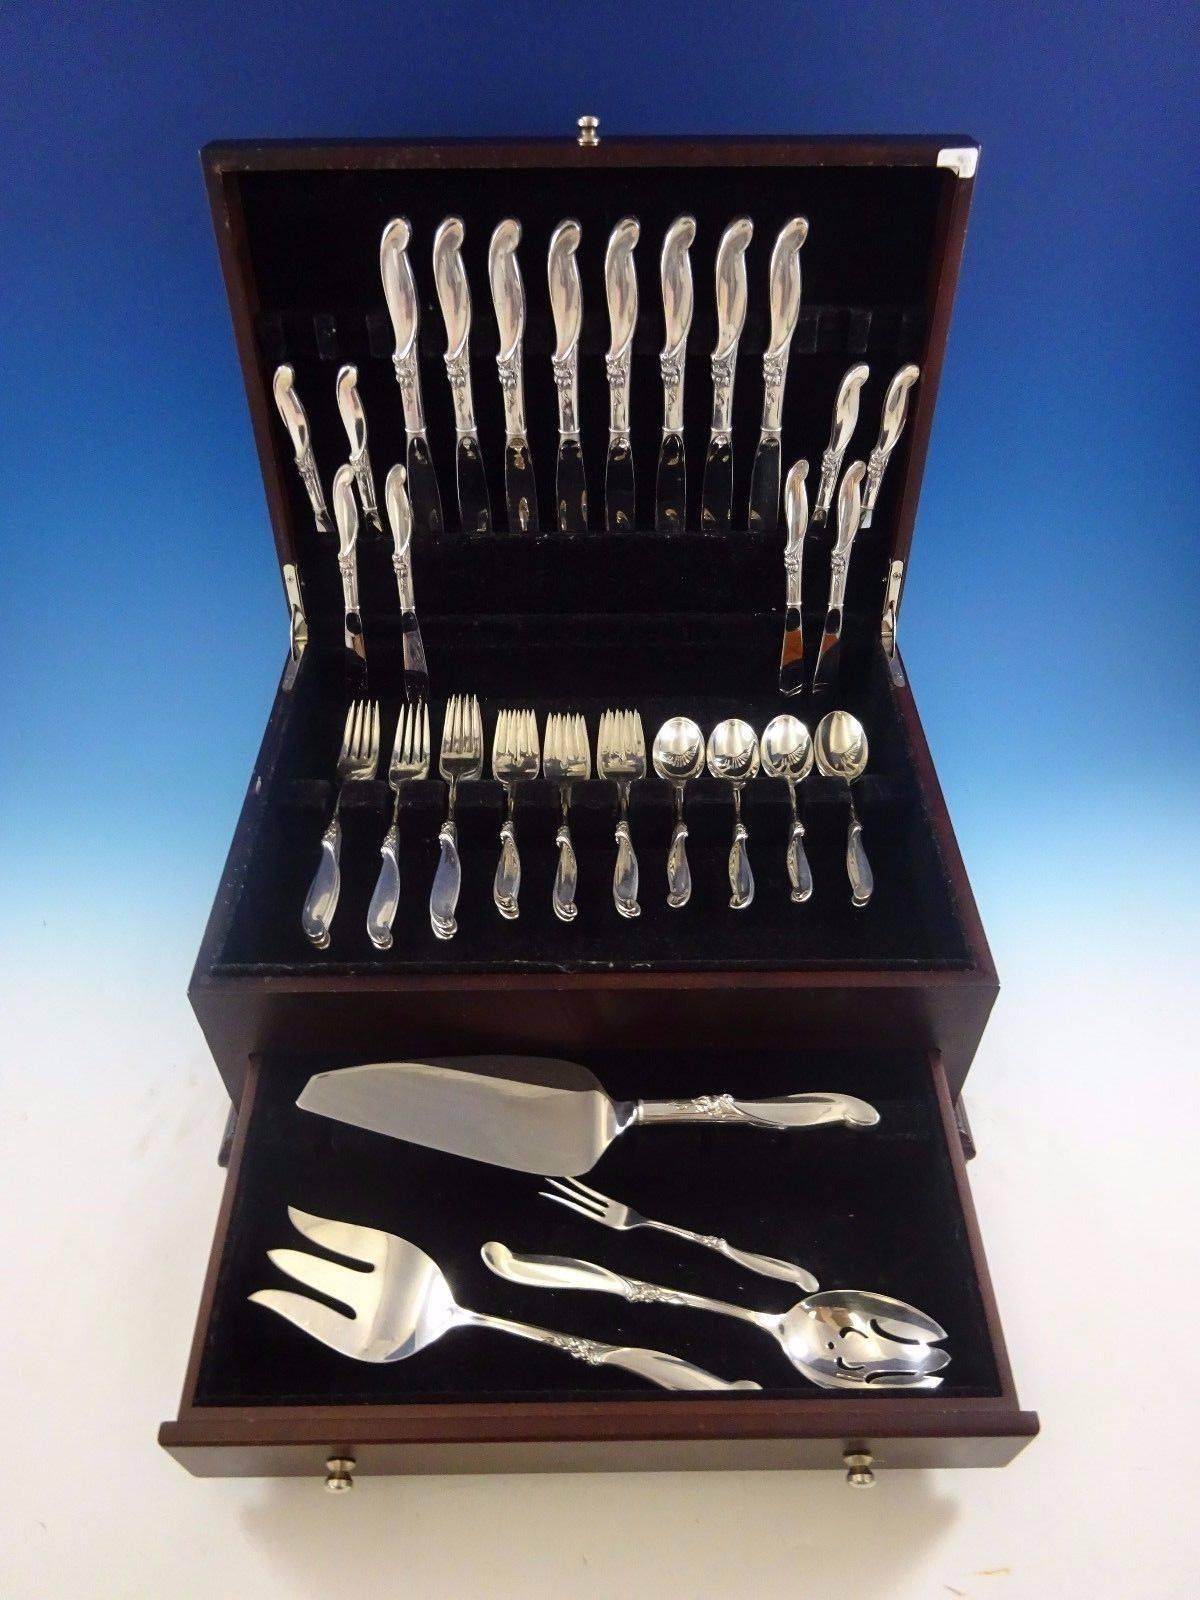 Mid-Century Modern Silver Melody by International sterling silver flatware set of 44 pieces. This set includes:

Eight knives, 9 1/8